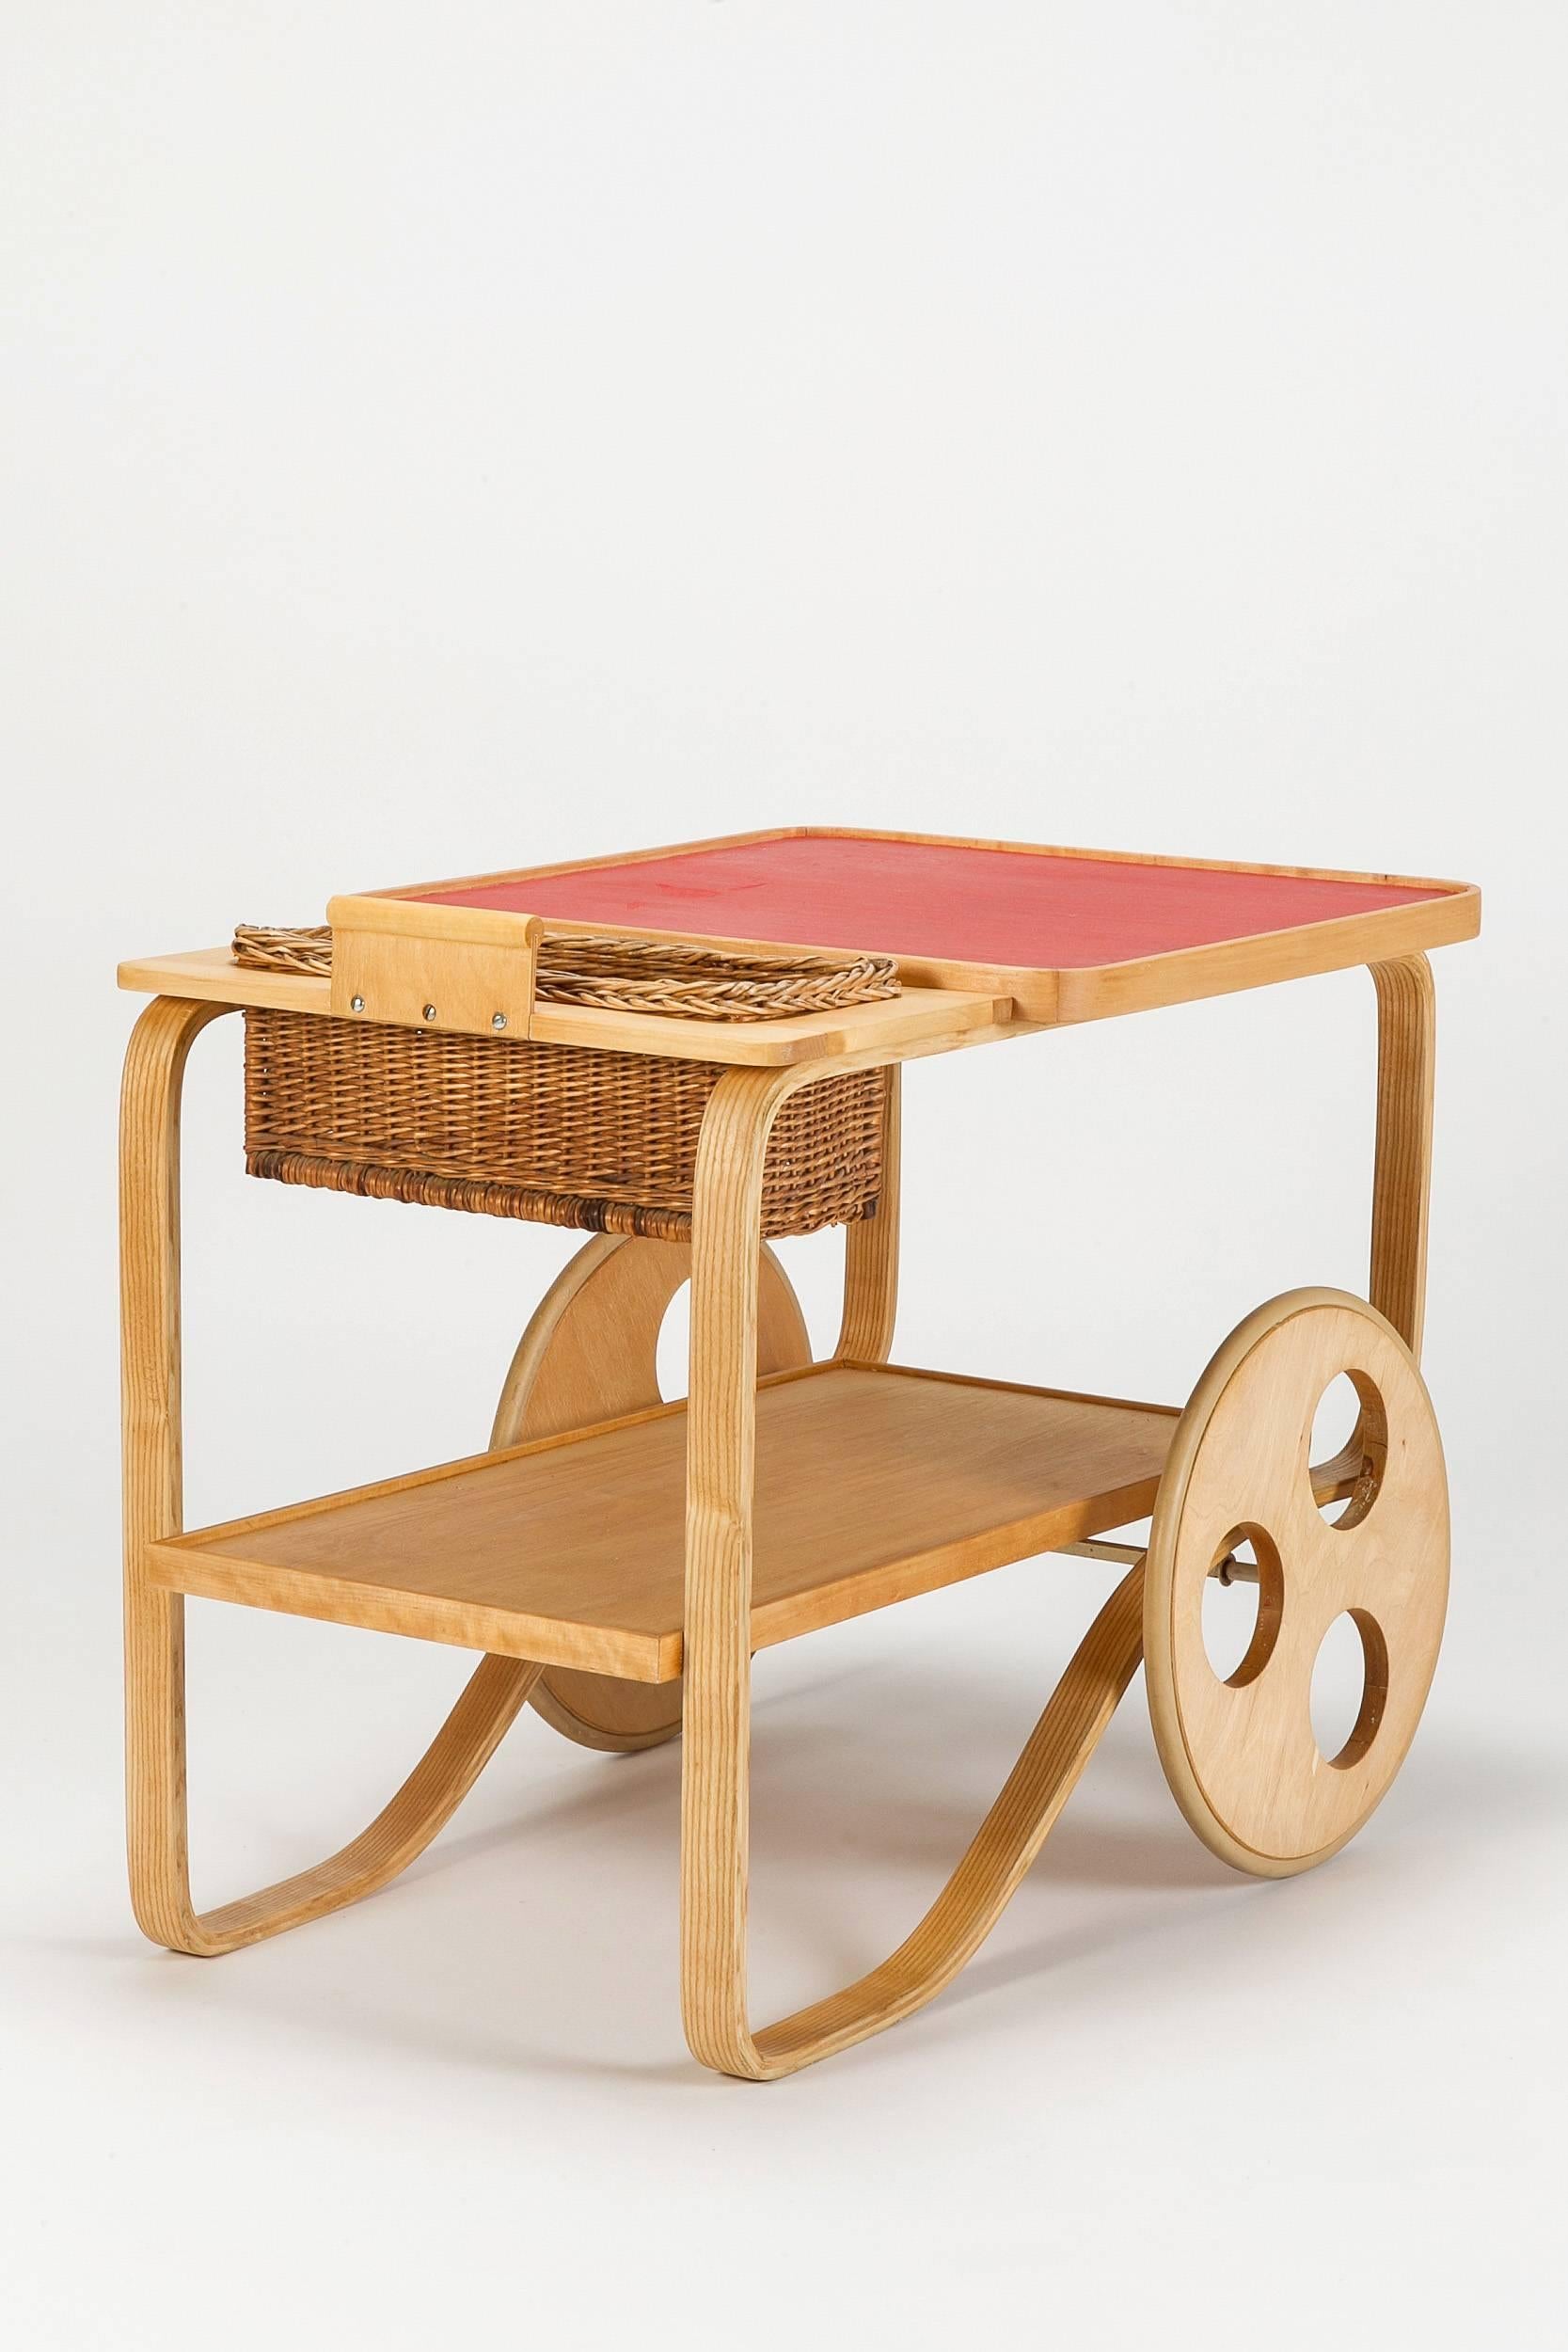 Incredibly rare bar cart or serving trolley by Alvar Aalto for Wohnbedarf Zurich, Switzerland in 1937. Made of solid birch and birch plywood, red linoleum surface with a removable wicker basket, Rubber coated wheels. 